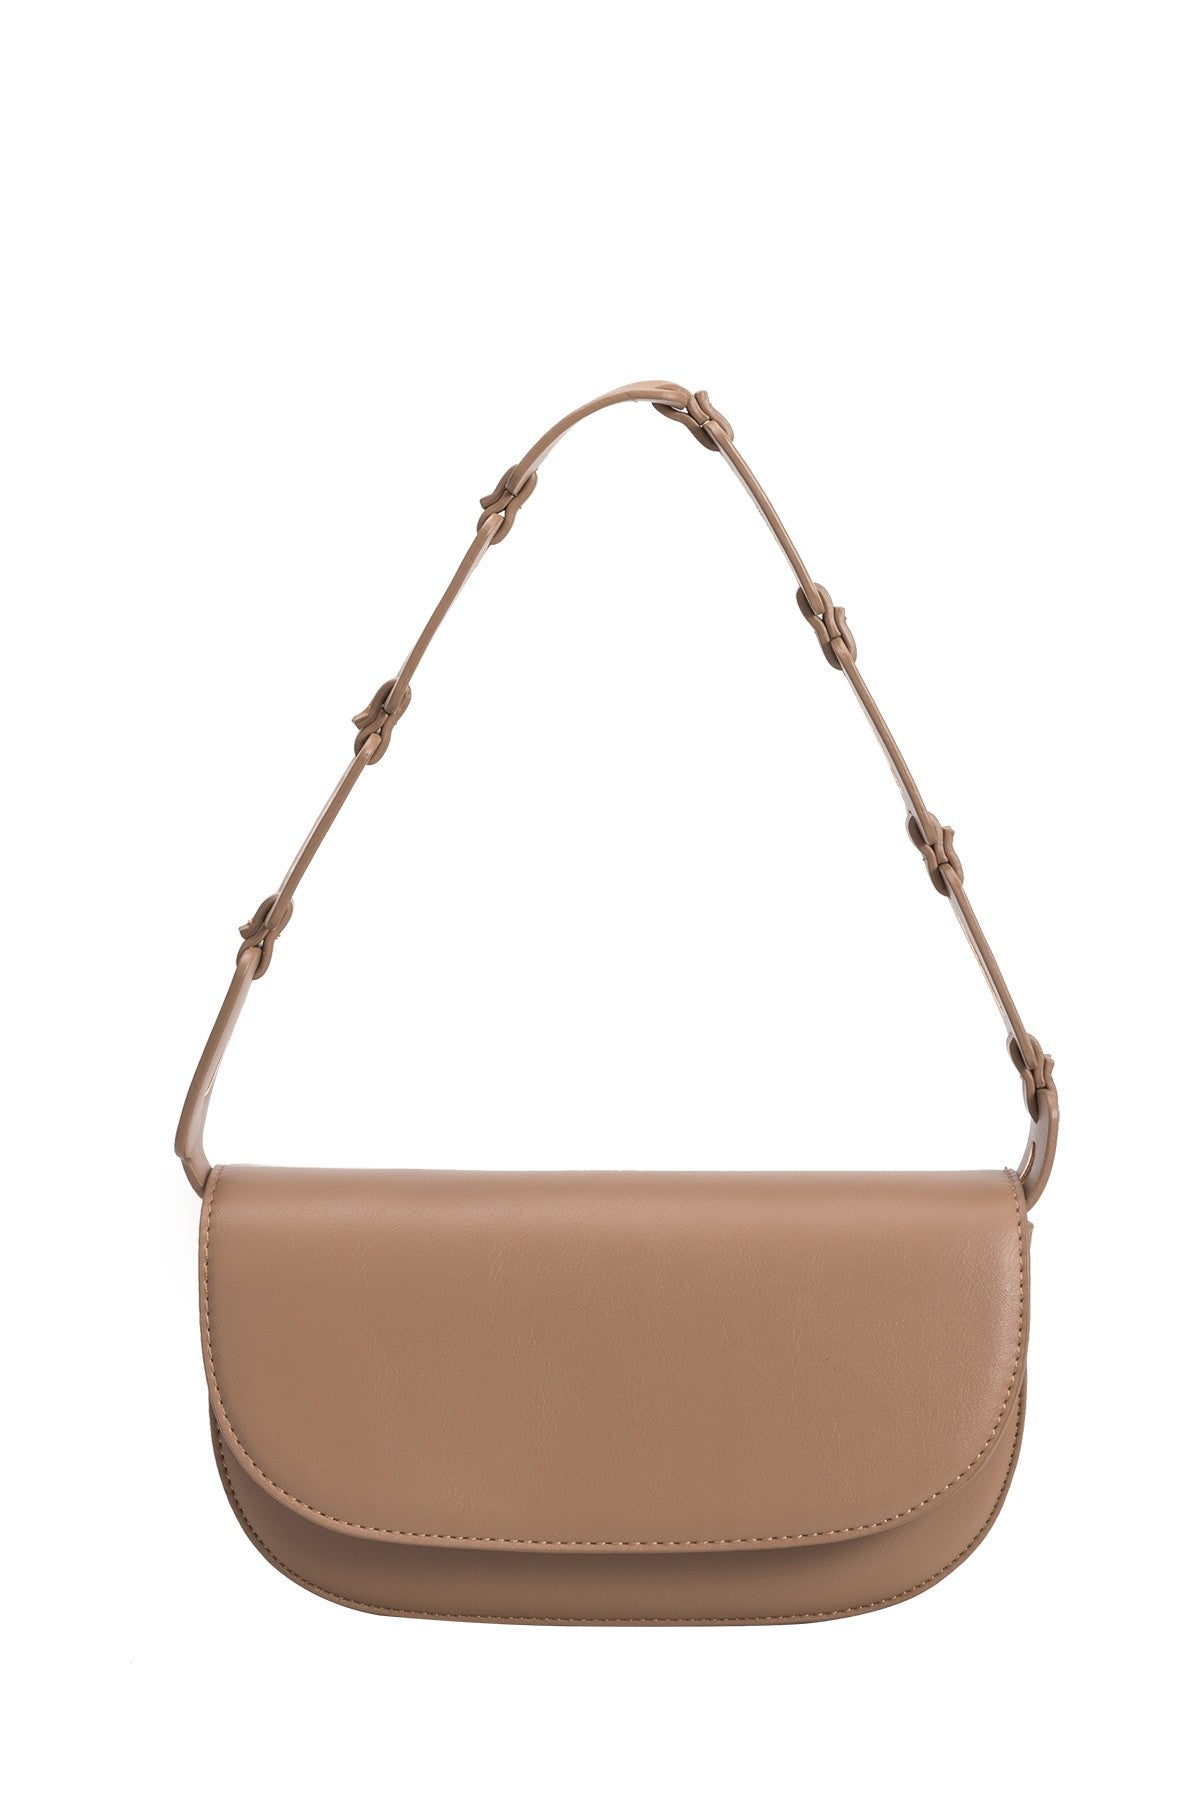 Inez Taupe Shoulder Bag | Collective Request 